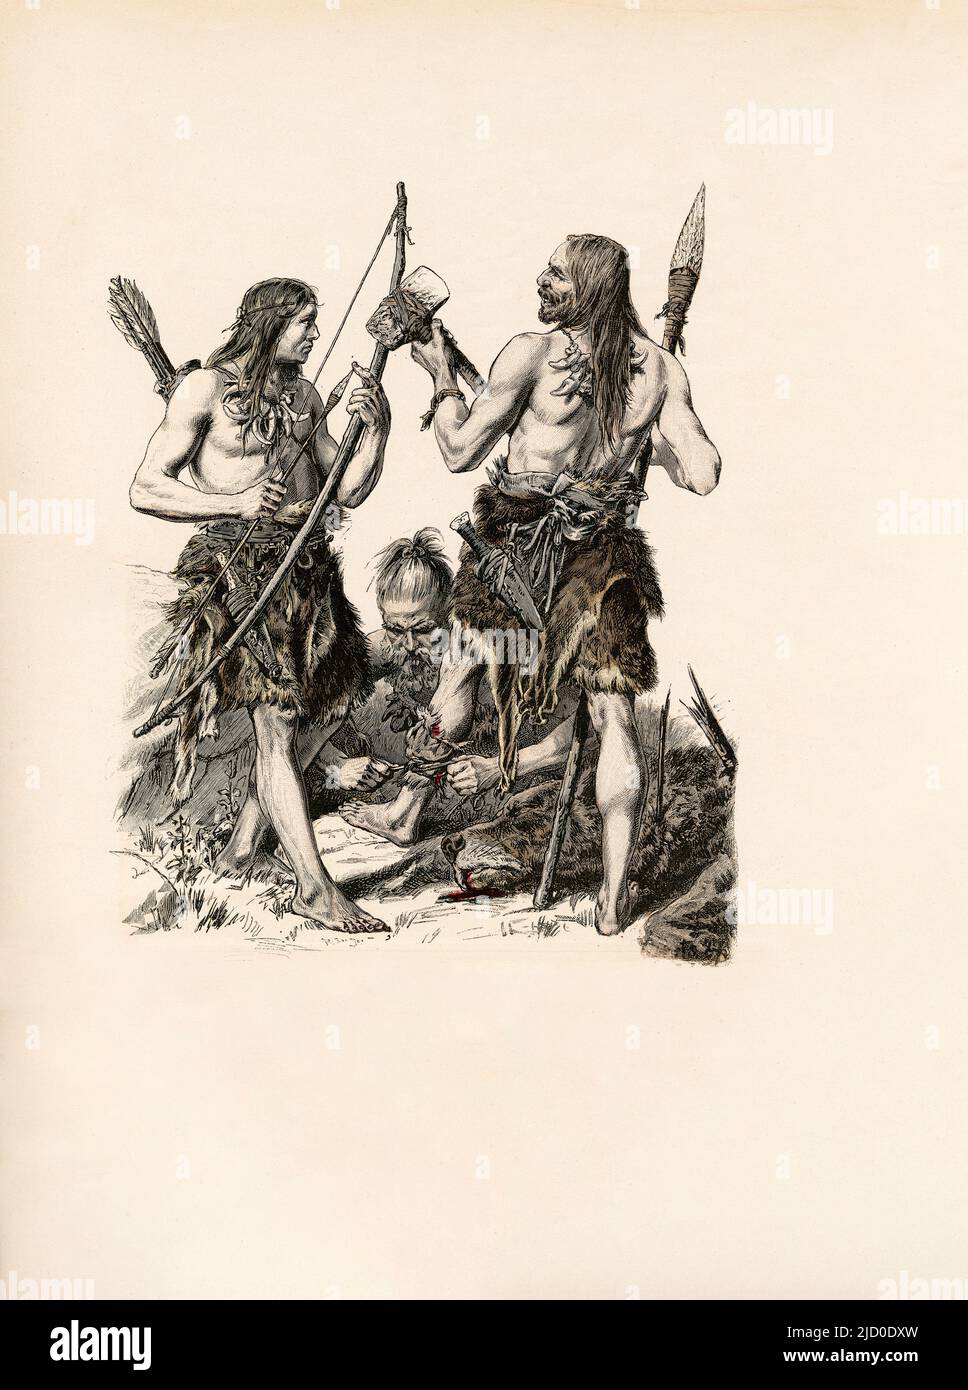 Ancient Germans, The Teutonic Tribes, The Stone Age, Illustration, The History of Costume, Braun & Schneider, Munich, Germany, 1861-1880 Stock Photo